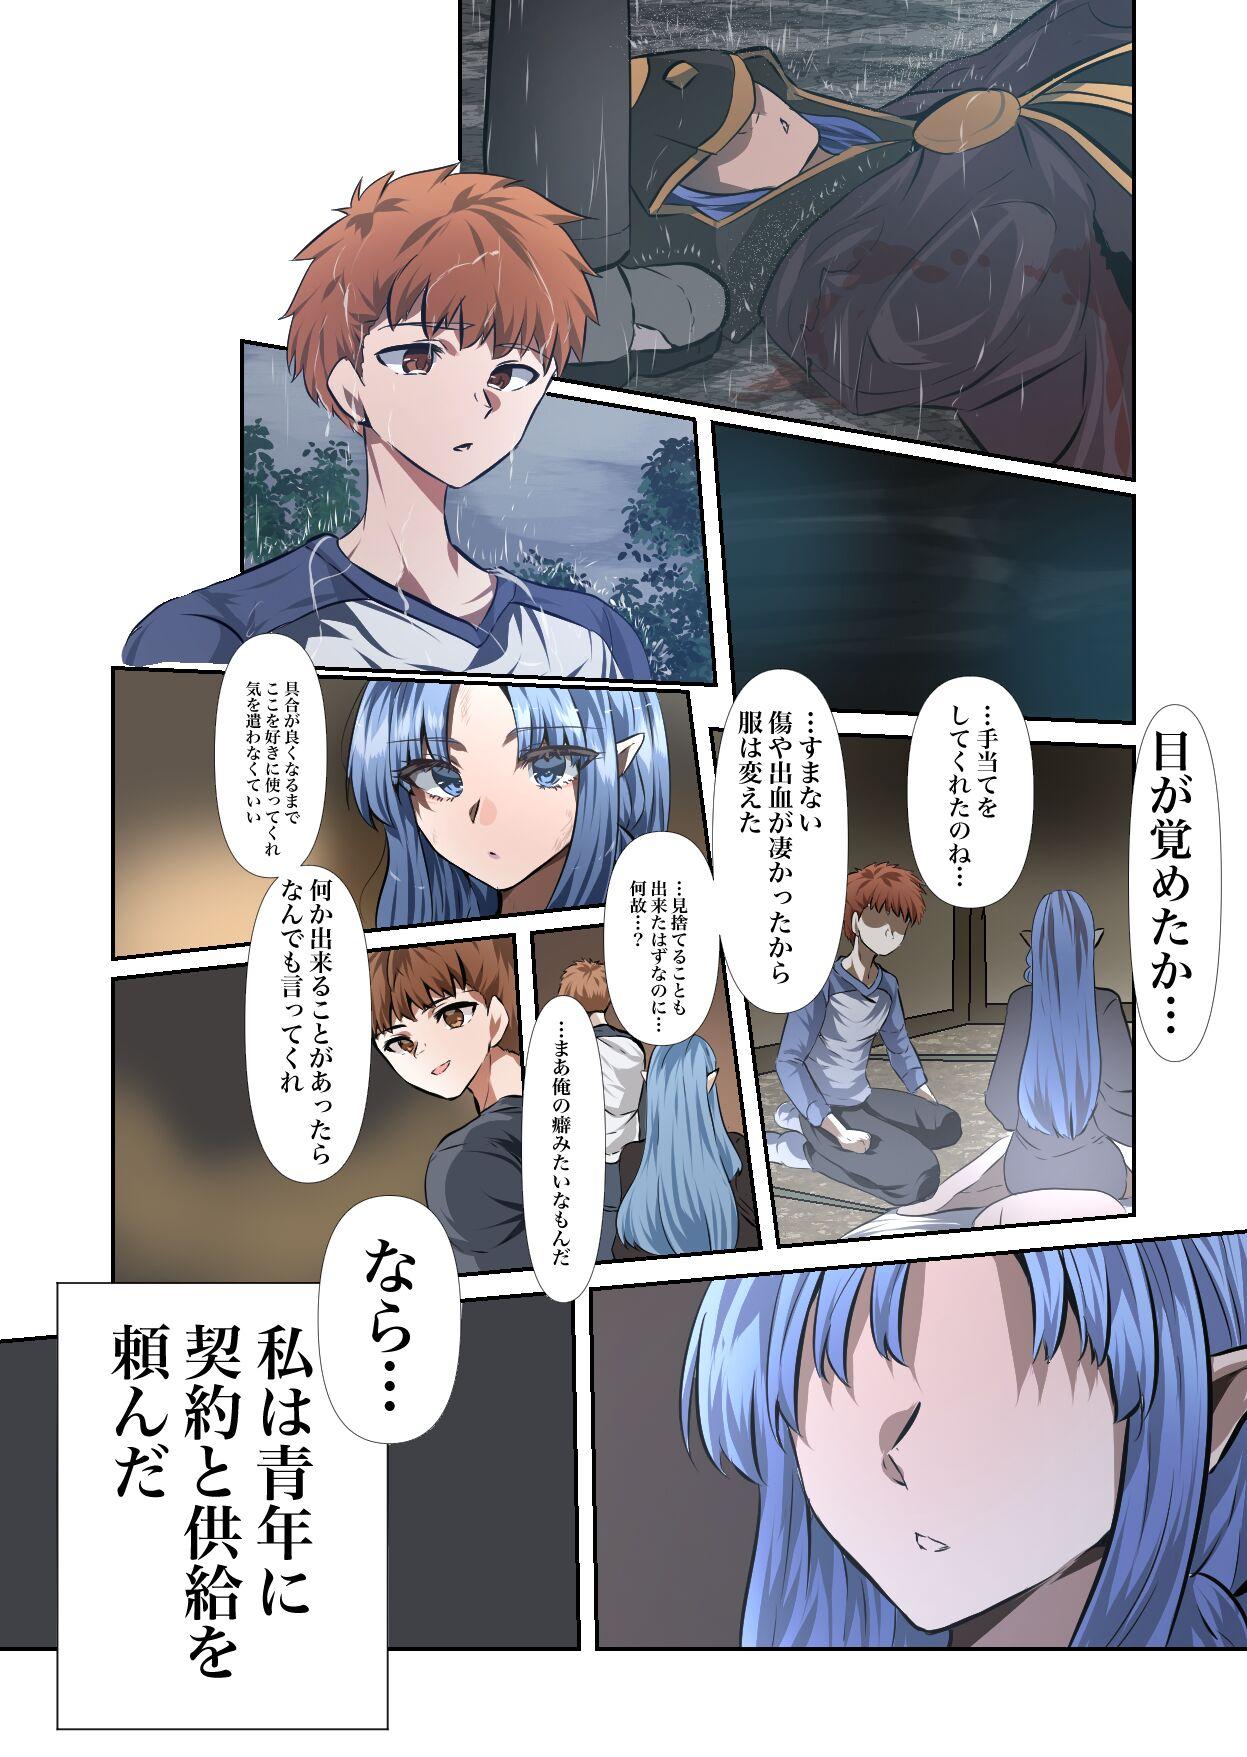 Creampies if Caster to Emiya Shirou - Fate stay night Interview - Page 1